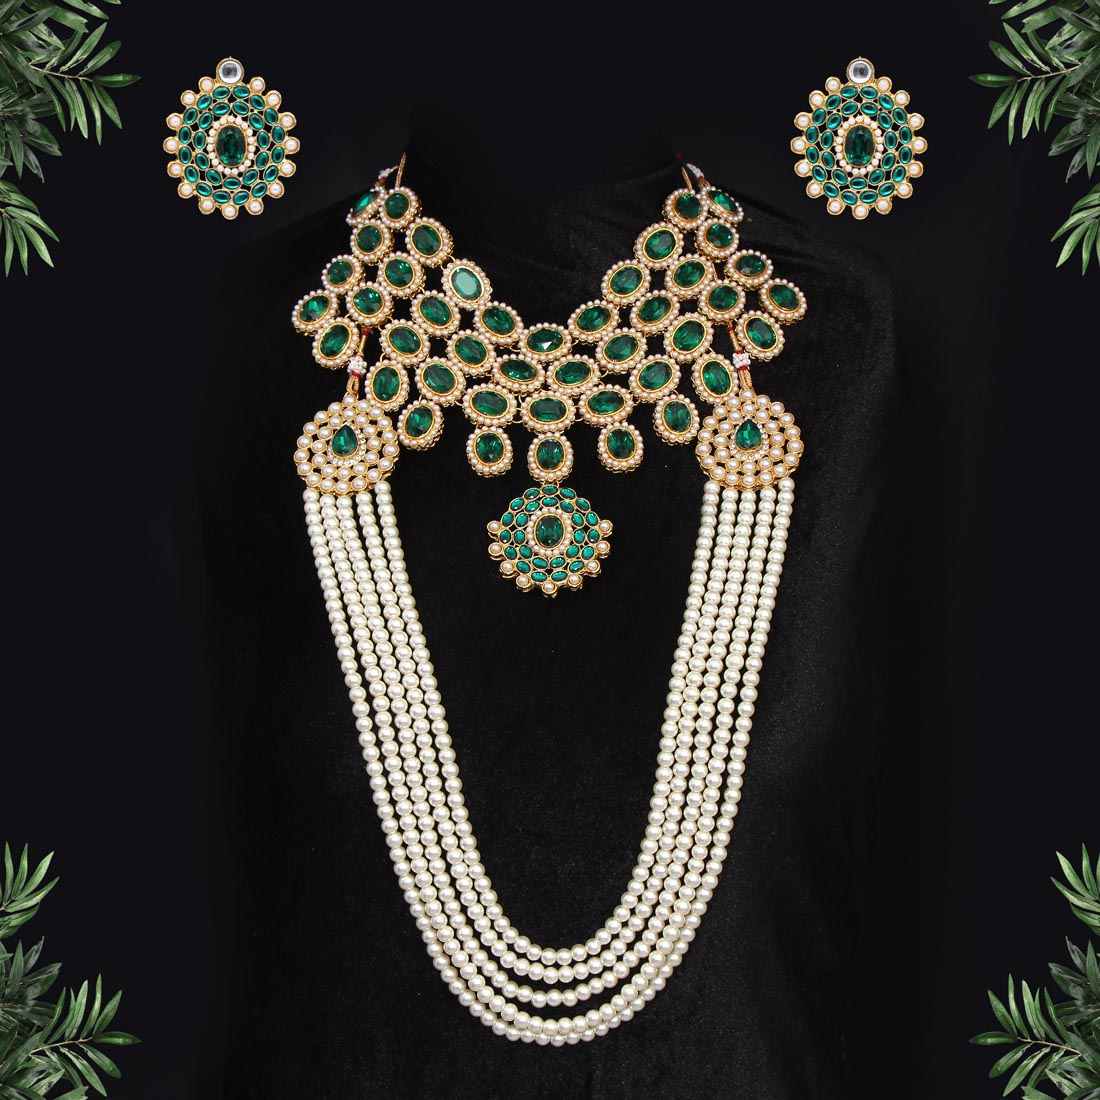 Green Color Kundan Bollywood Necklace With Earrings (KN223GRN) Jewellery GetGlit   